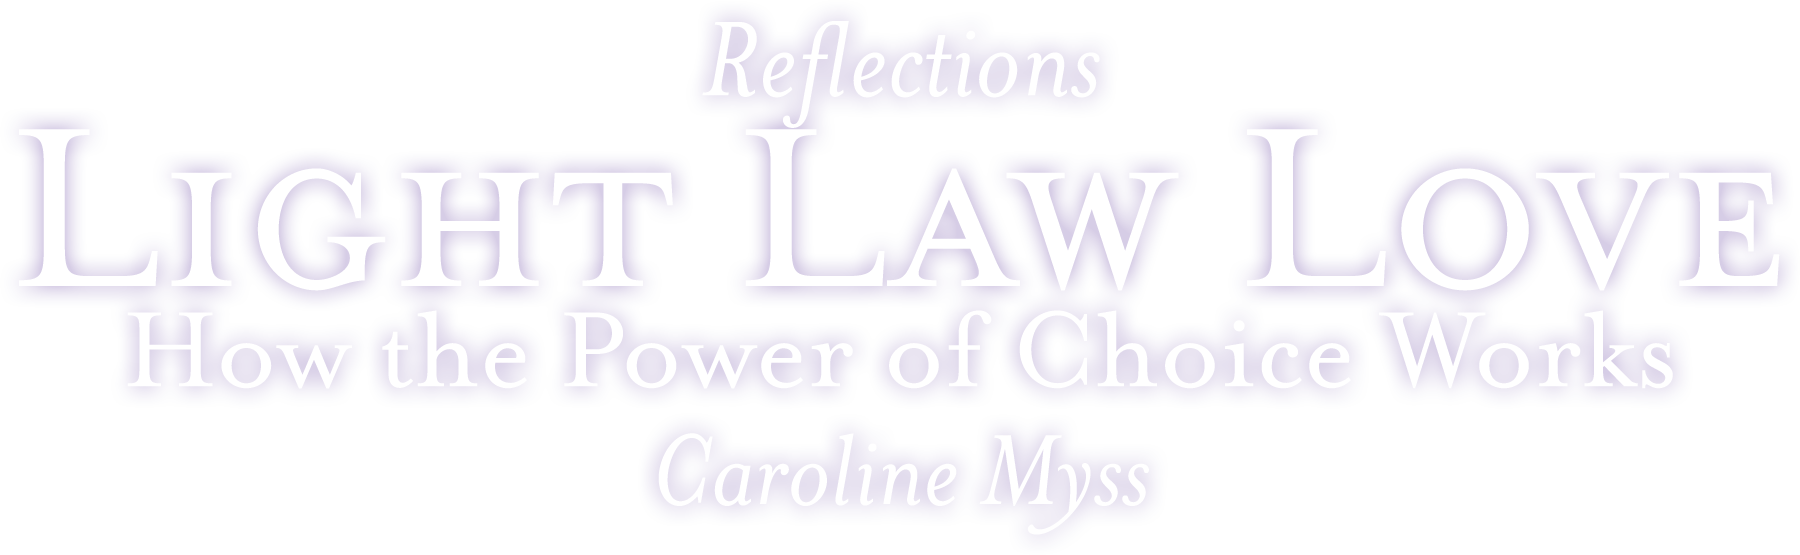 Reflections: Light, Law, Love - How the Power of Choice Works